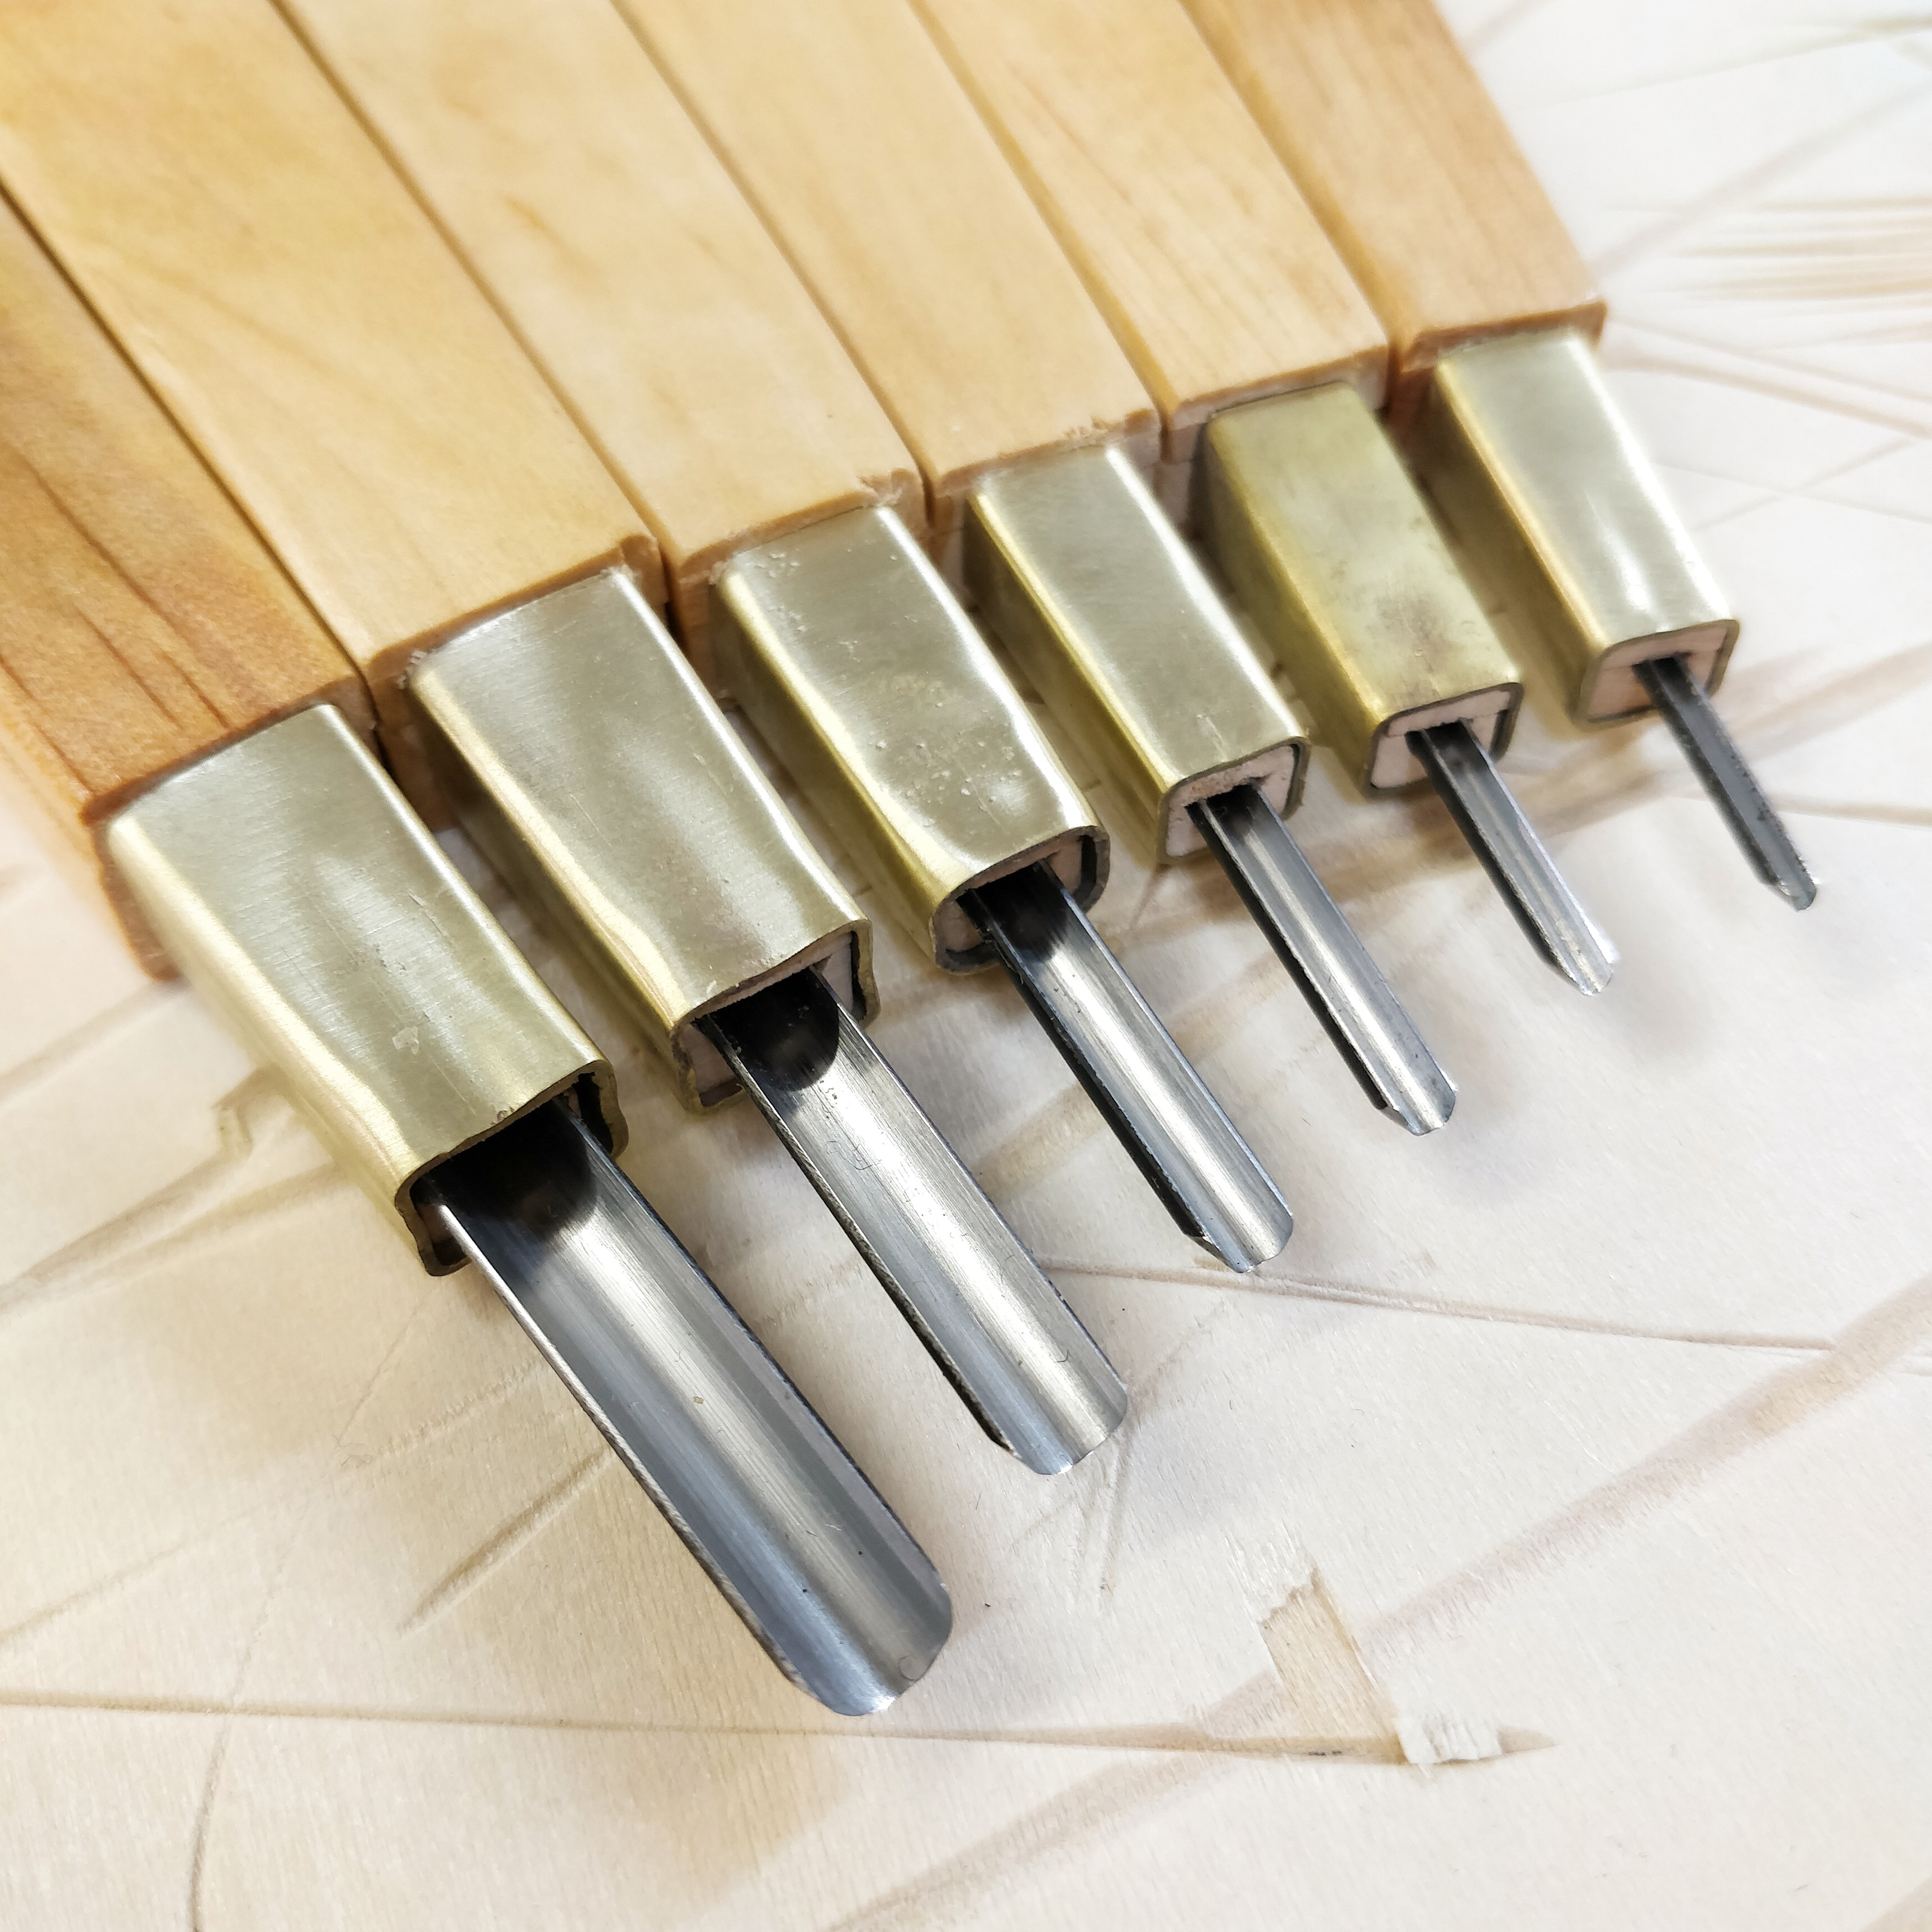 Relief Cutting Tools